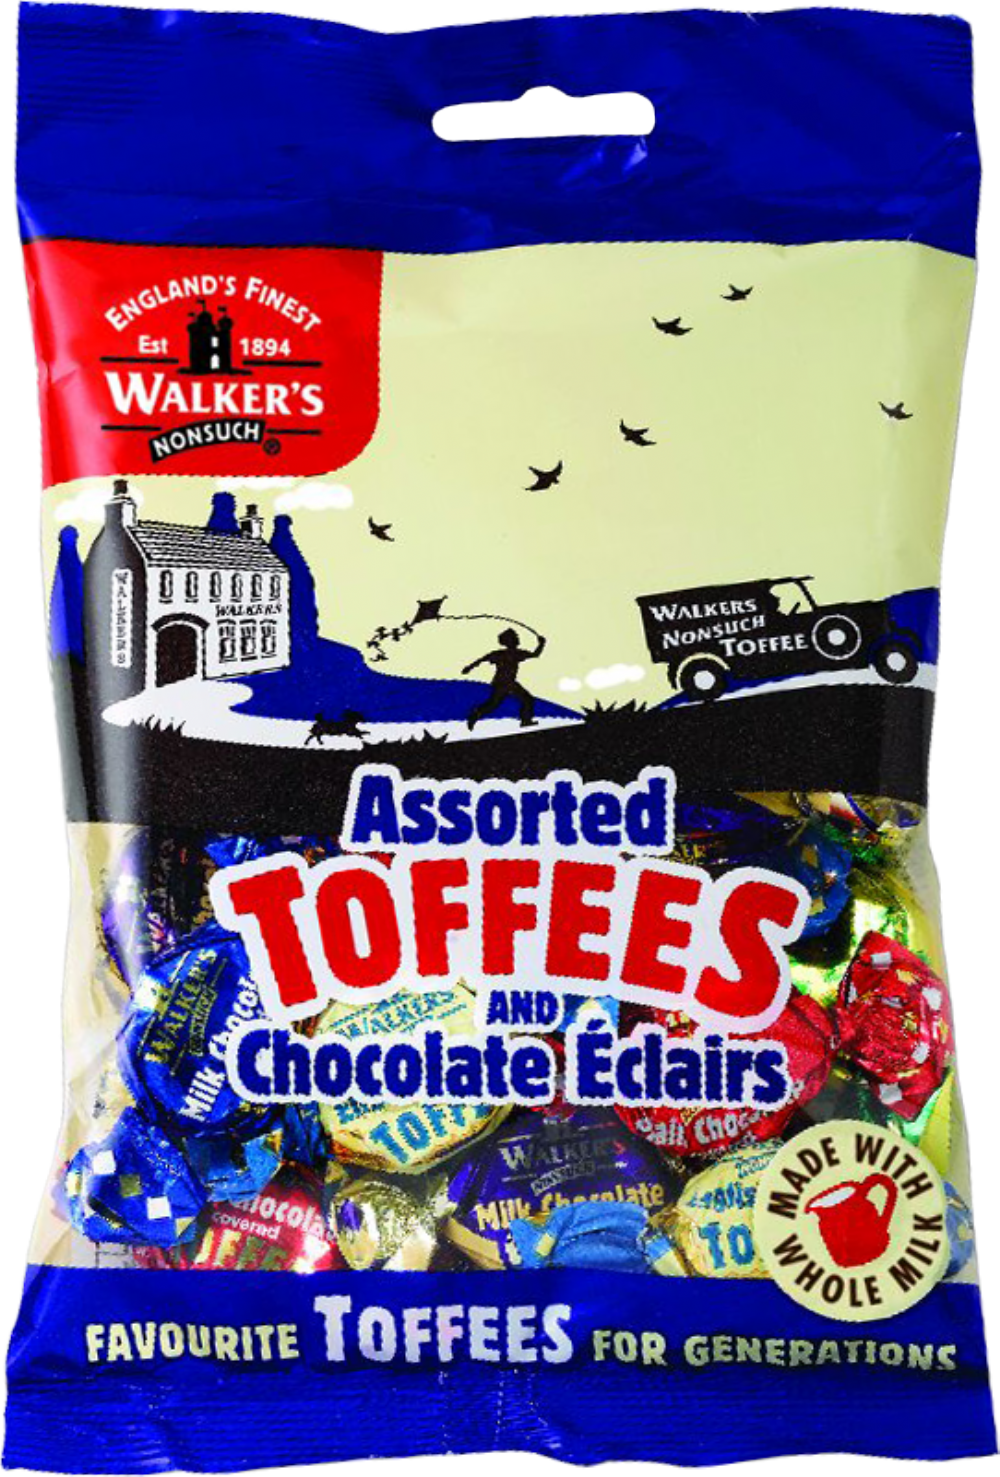 WALKER'S NONSUCH Assorted Toffees & Choc Eclairs - Bag 150g